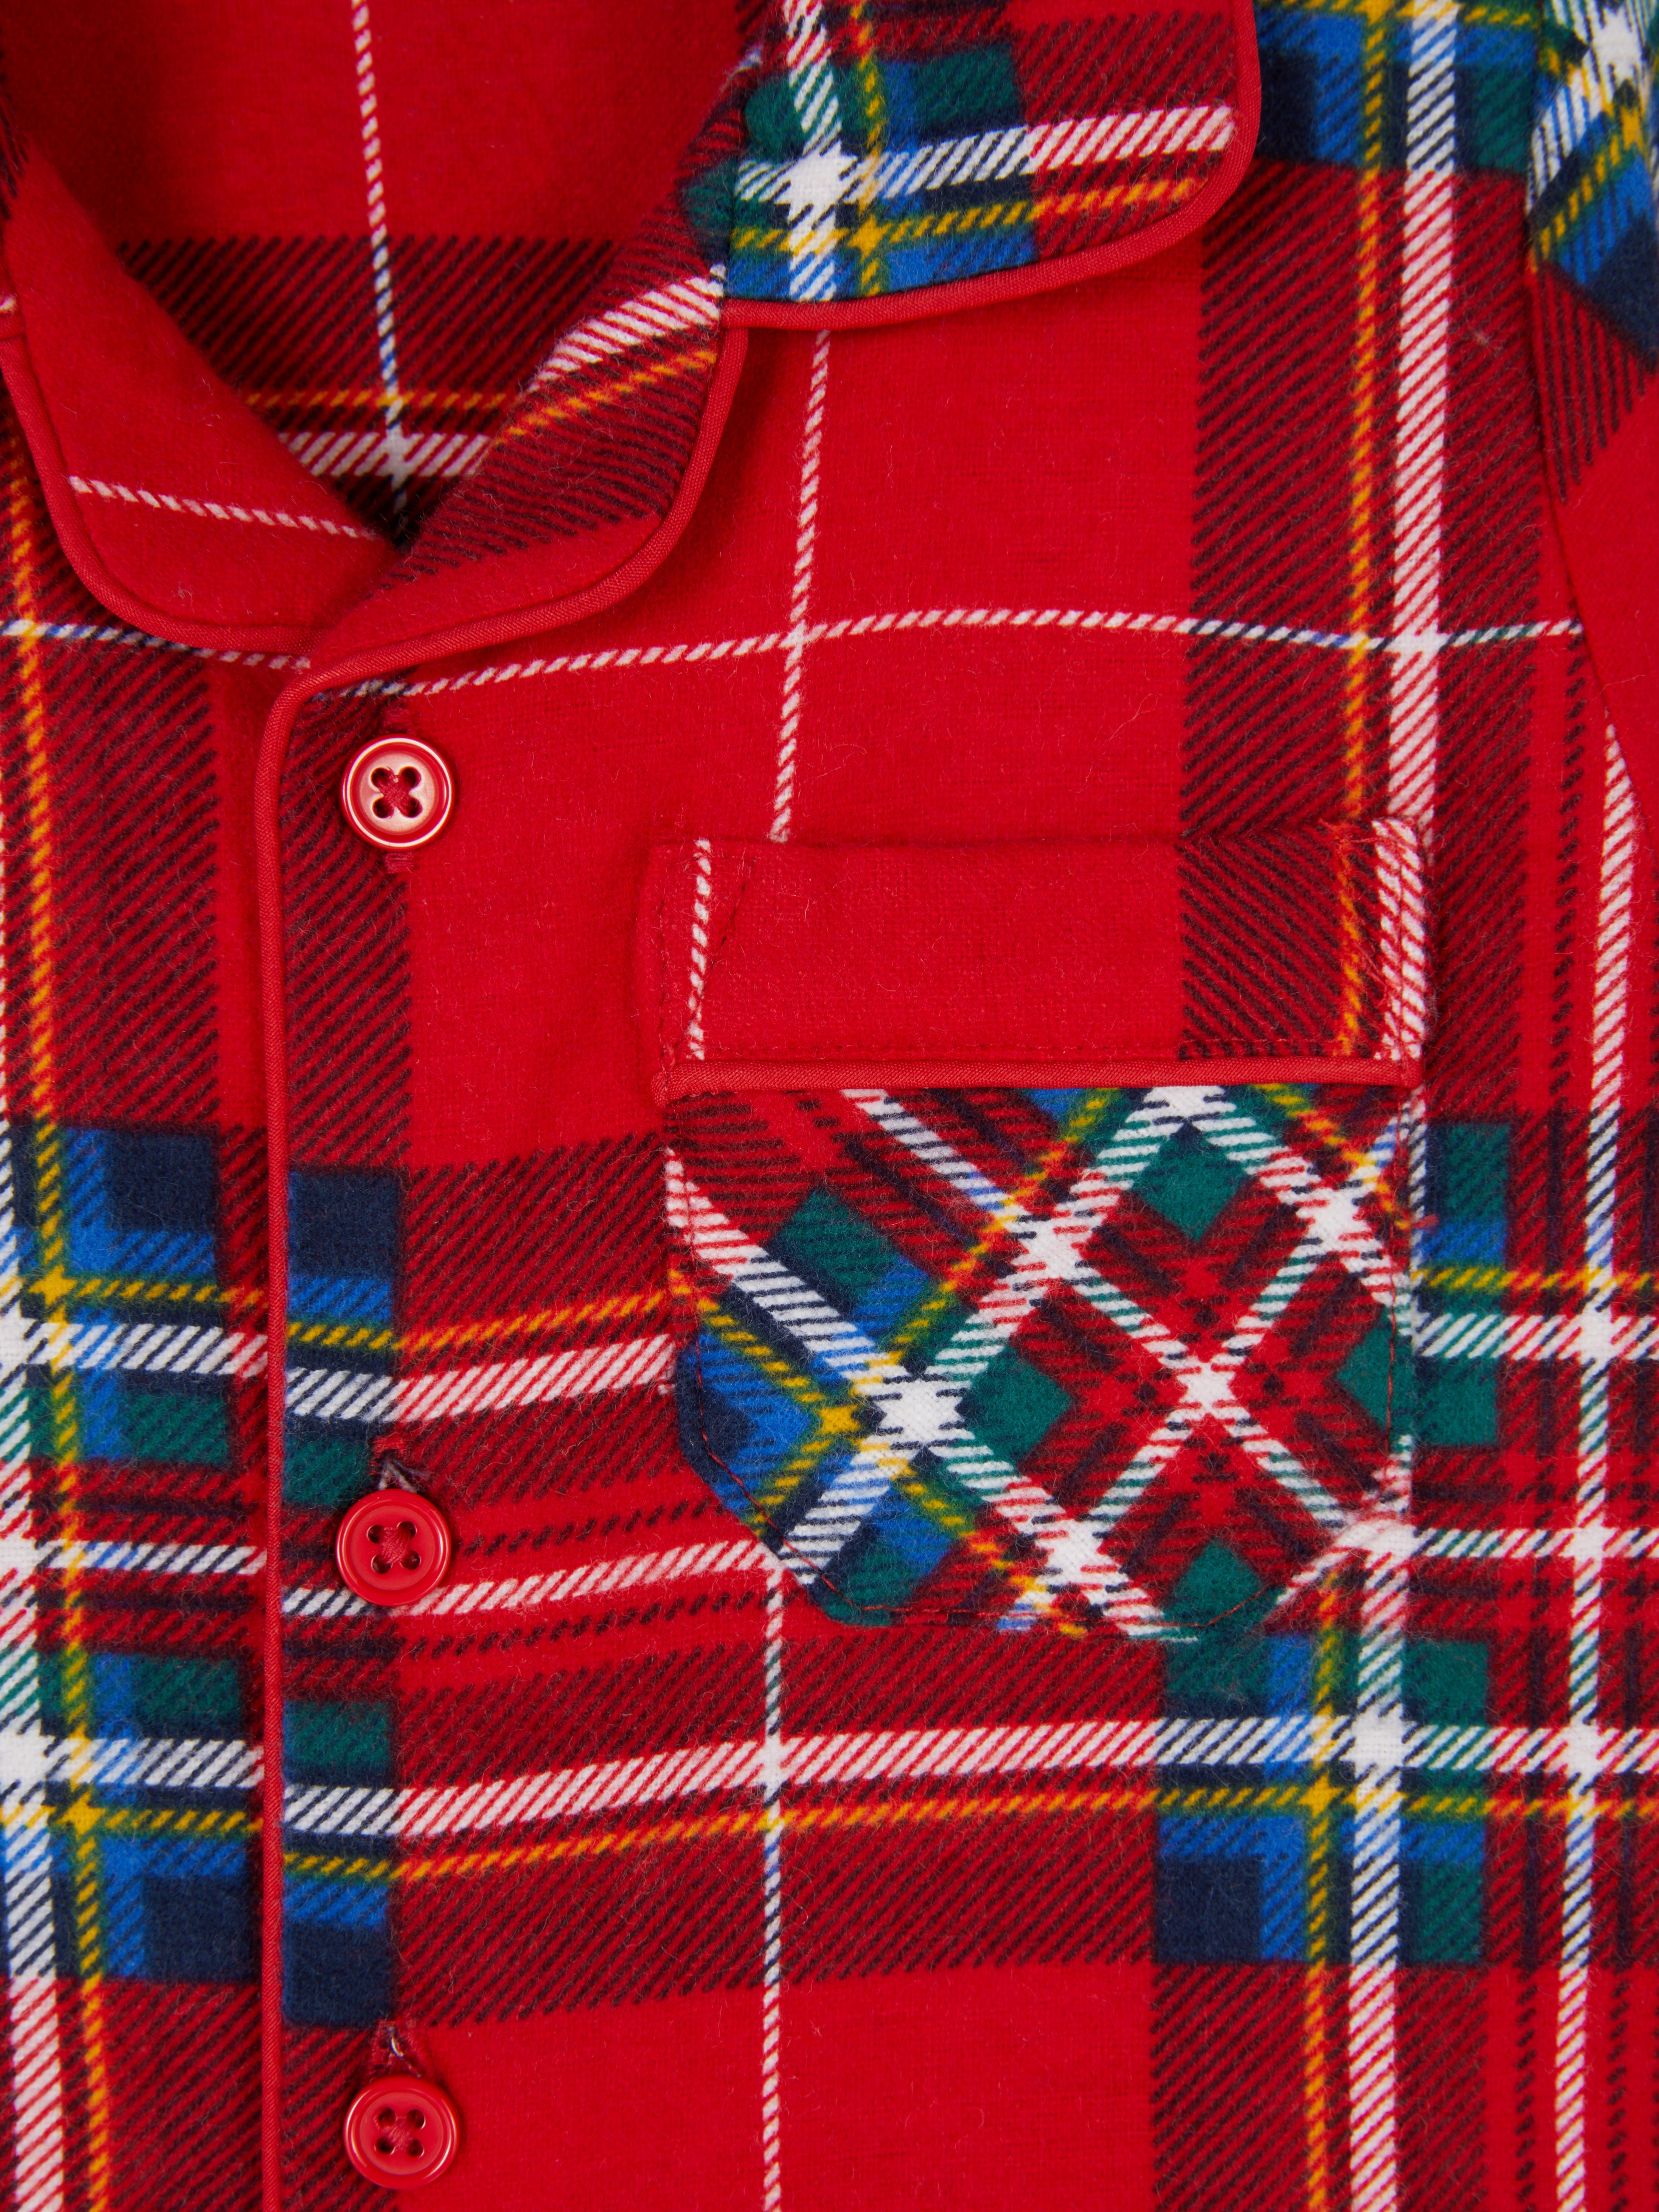 Baby Checked Flannel Pyjamas